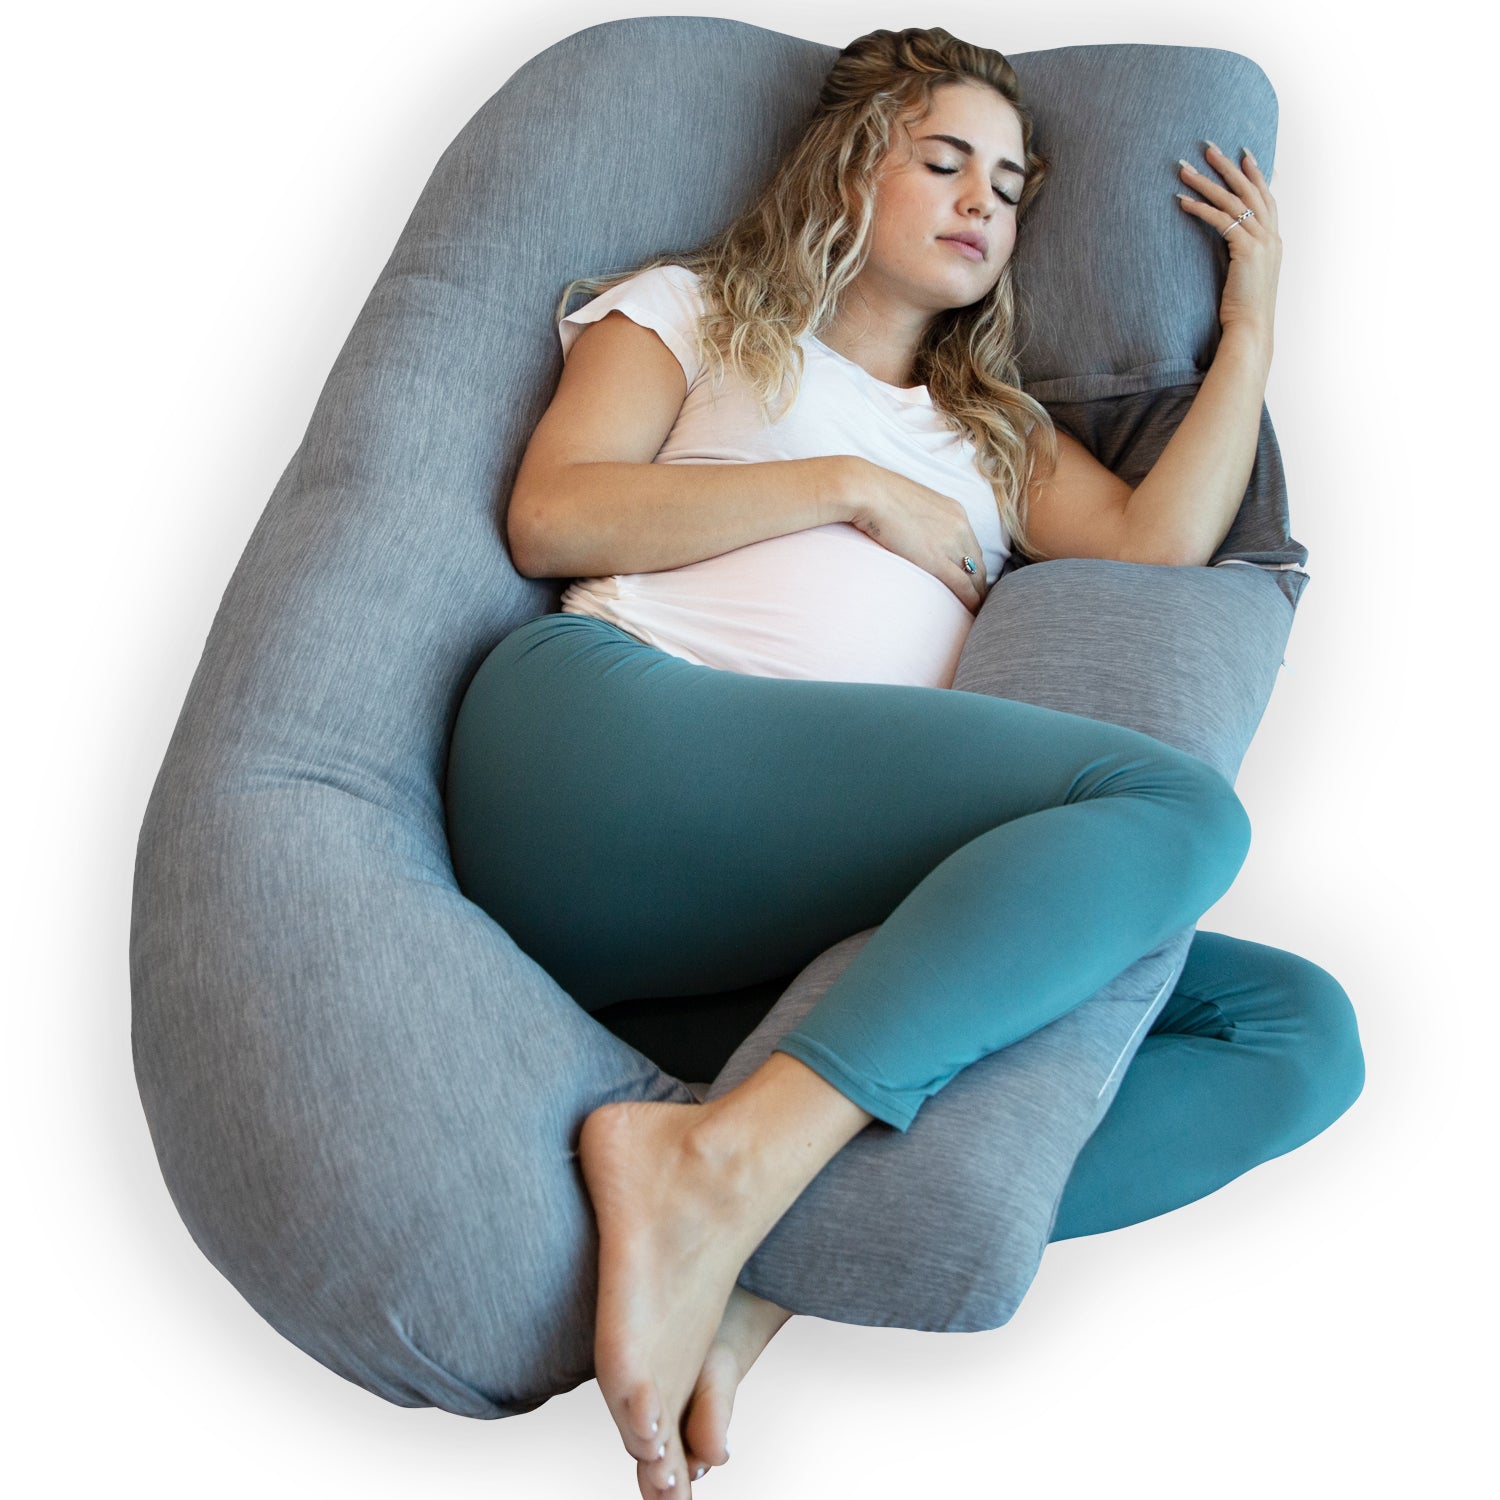 U-Shaped Pregnancy Pillow with Cooling Cover - PharMeDoc